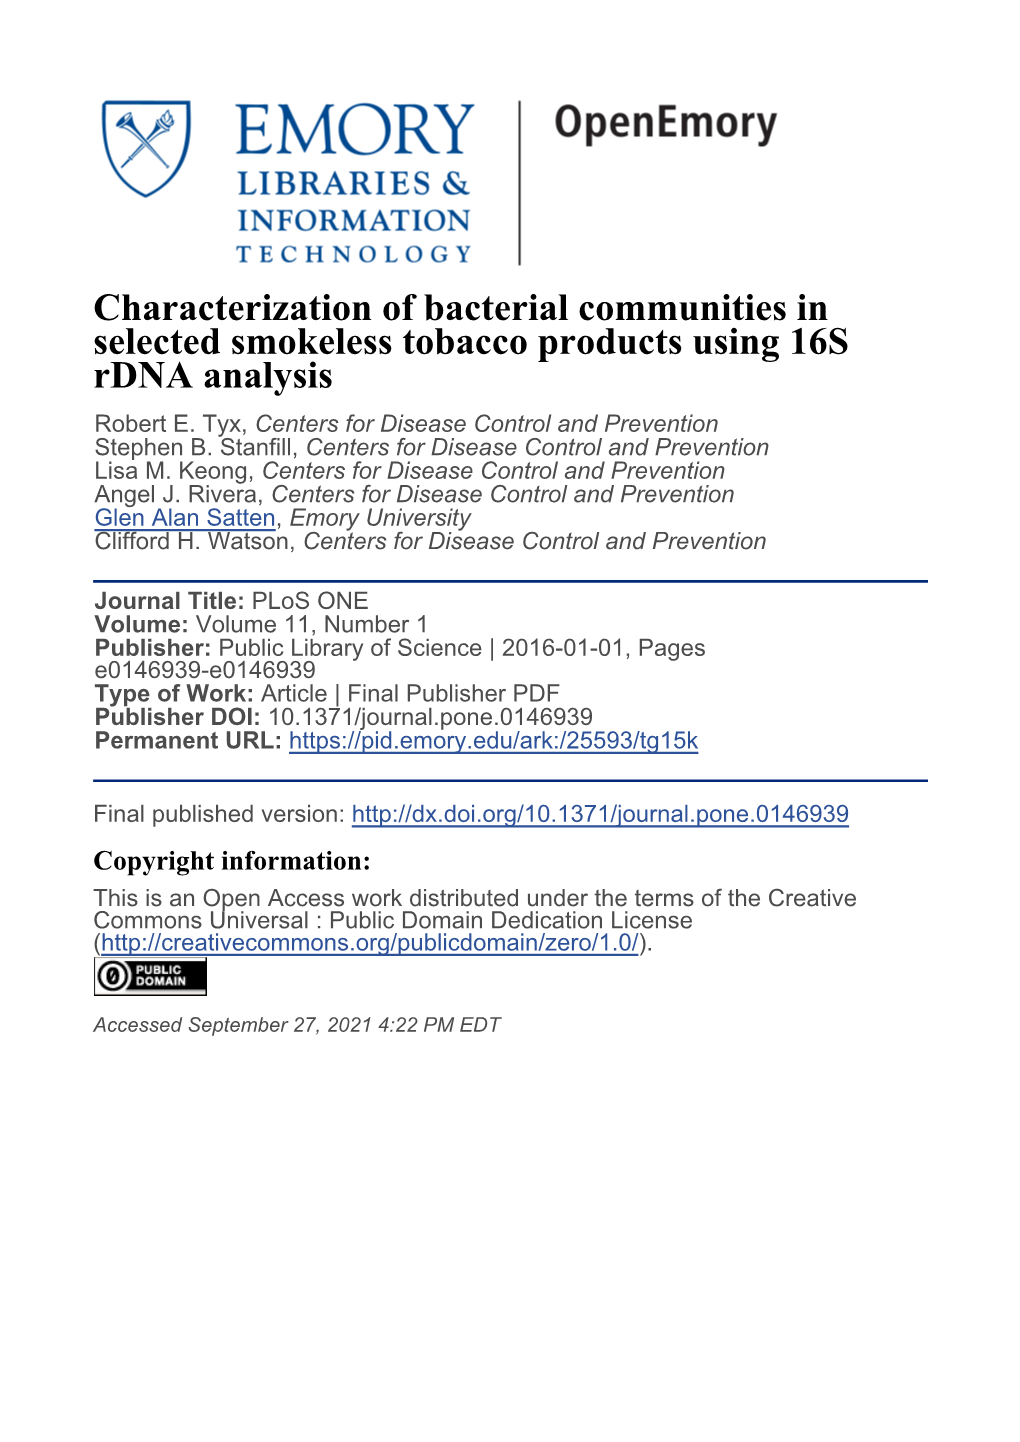 Characterization of Bacterial Communities in Selected Smokeless Tobacco Products Using 16S Rdna Analysis Robert E